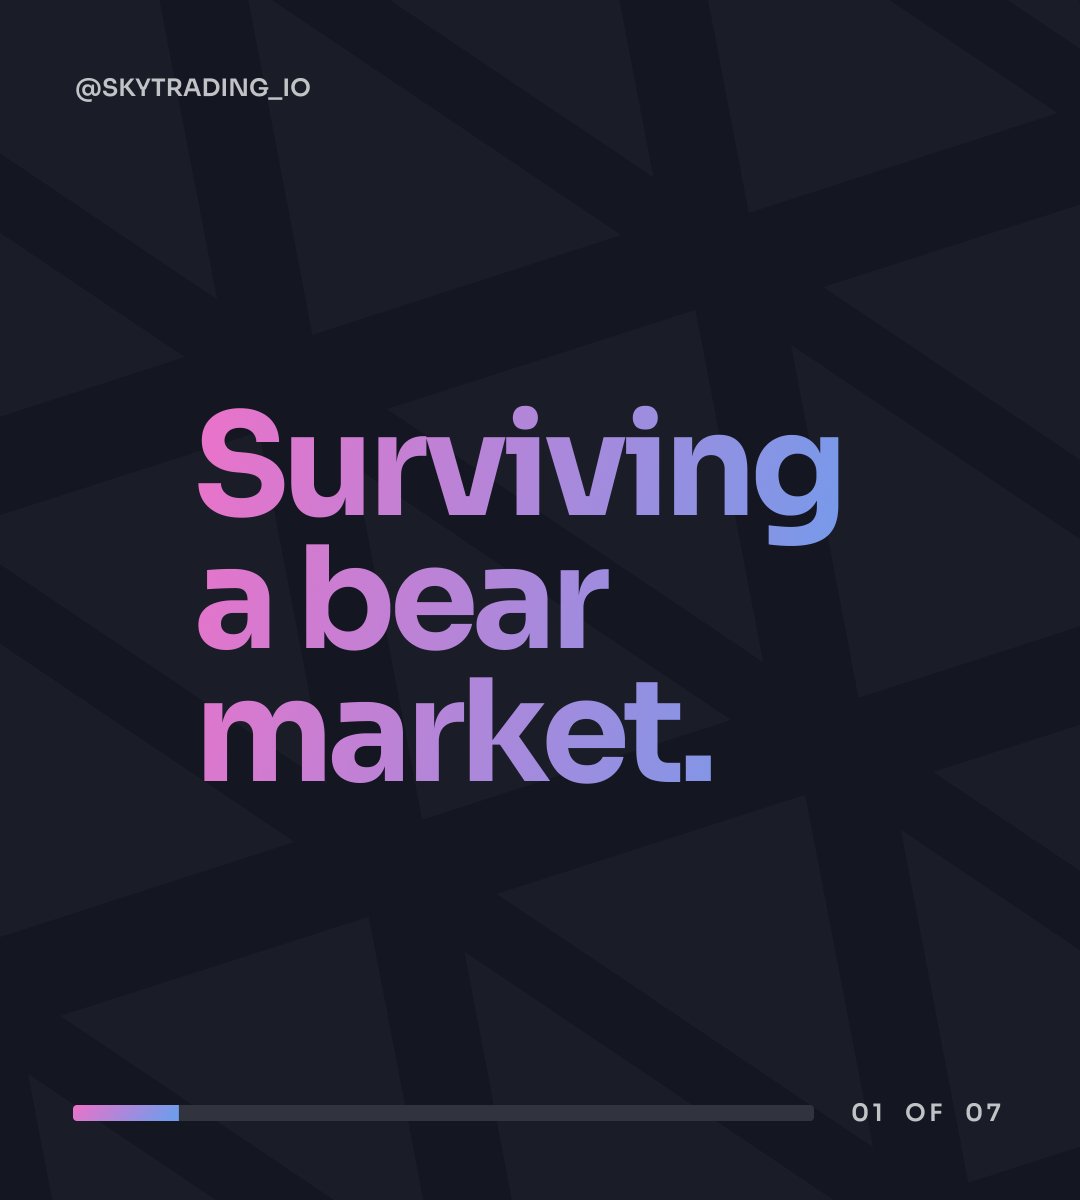 While bull markets bring joy, bear markets can be a tough pill to swallow. Here's your survival guide to navigating the choppy waters of a bear market:

#skytrading #BullMarket #BearMarket #SmartInvesting #MarketResilience